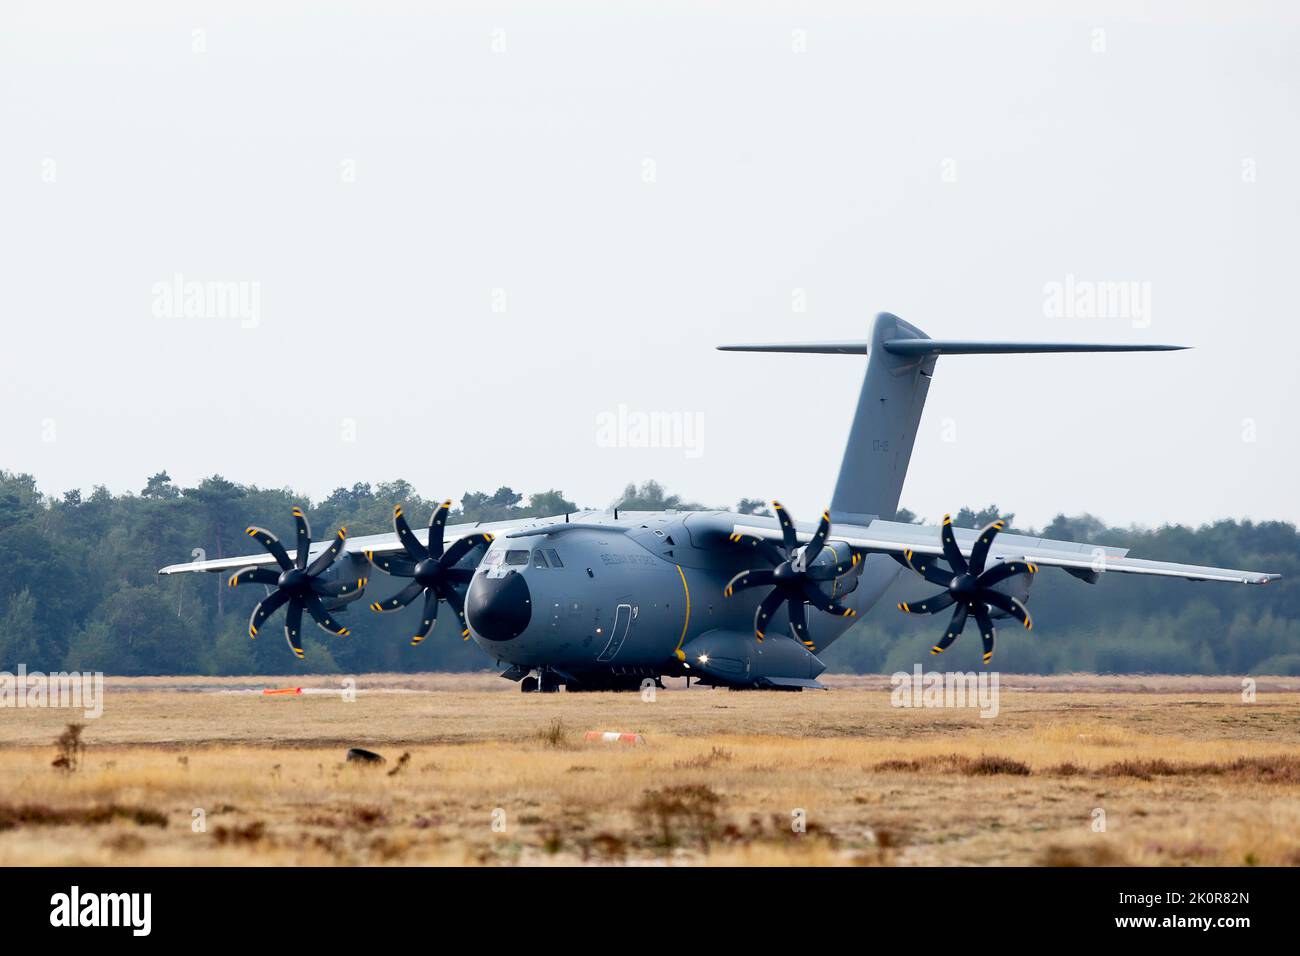 Illustration picture shows the Airbus A400M military transport aircraft during a press briefing on Storm Tide 2022 (05-16/09), the fictitious non-combatant evacuation operation, organised by Belgian defence, in Weelde, Tuesday 13 September 2022. About 800 soldiers from the Land, Air and Medical components will constitute an intervention detachment deployed there for a fictitious non-combatant evacuation operation (NEO) by incorporating the different specialties and skills of SO Regt. This press moment is organized to offer the possibility of observing the work of the para-commandos and the A40 Stock Photo